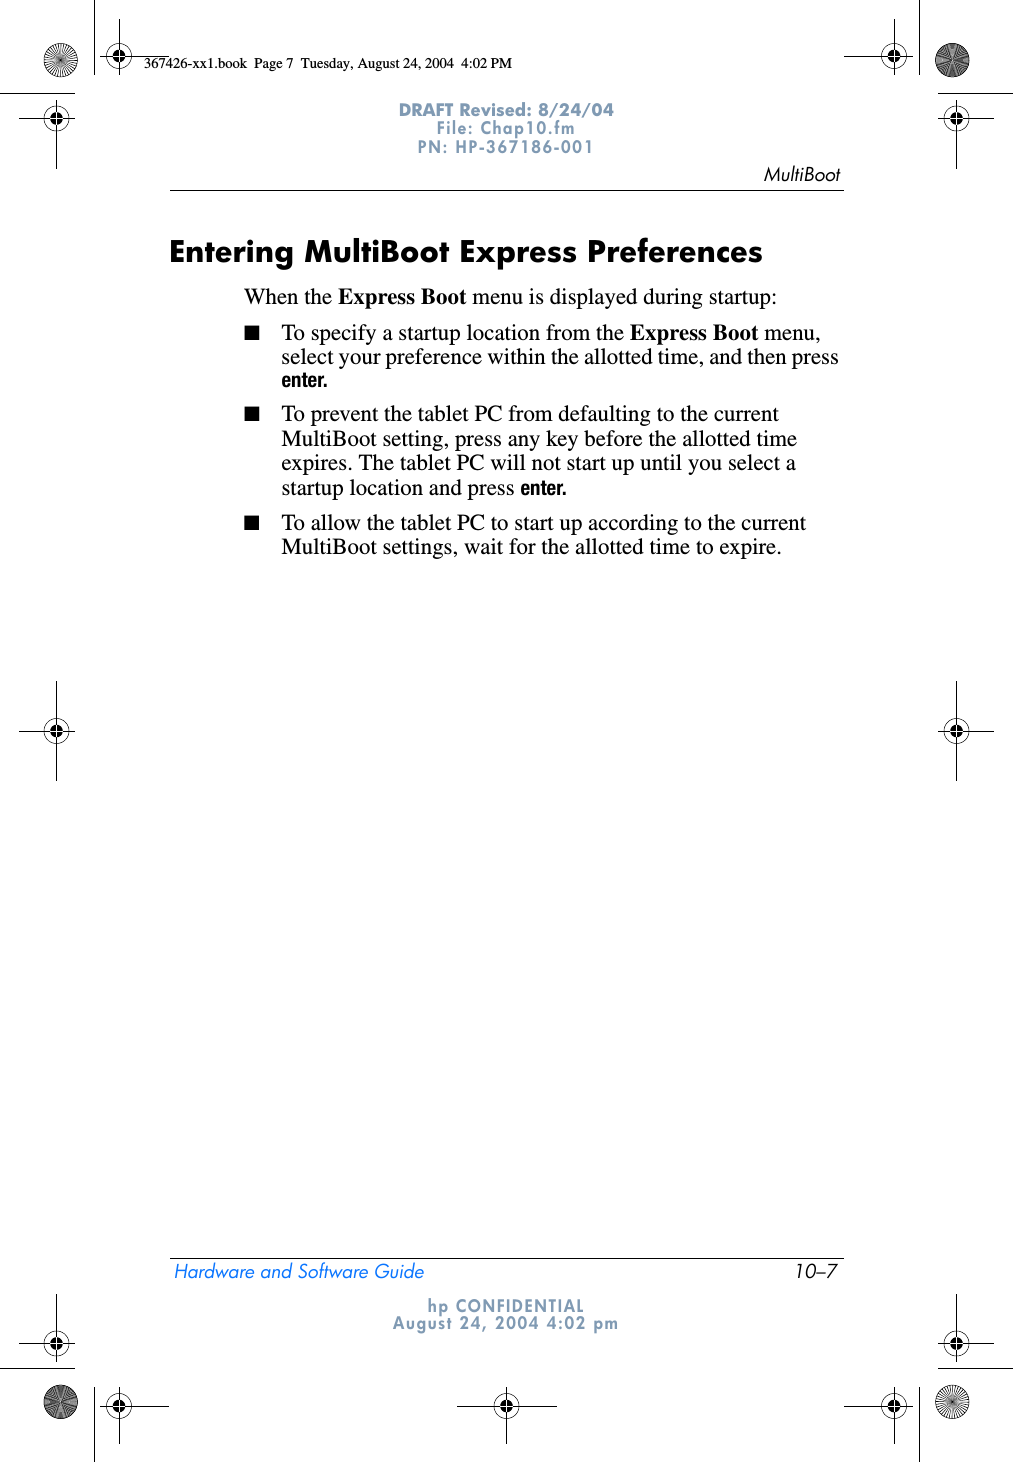 MultiBootHardware and Software Guide 10–7DRAFT Revised: 8/24/04File: Chap10.fm PN: HP-367186-001 hp CONFIDENTIALAugust 24, 2004 4:02 pmEntering MultiBoot Express PreferencesWhen the Express Boot menu is displayed during startup:■To specify a startup location from the Express Boot menu, select your preference within the allotted time, and then press enter.■To prevent the tablet PC from defaulting to the current MultiBoot setting, press any key before the allotted time expires. The tablet PC will not start up until you select a startup location and press enter.■To allow the tablet PC to start up according to the current MultiBoot settings, wait for the allotted time to expire.367426-xx1.book  Page 7  Tuesday, August 24, 2004  4:02 PM